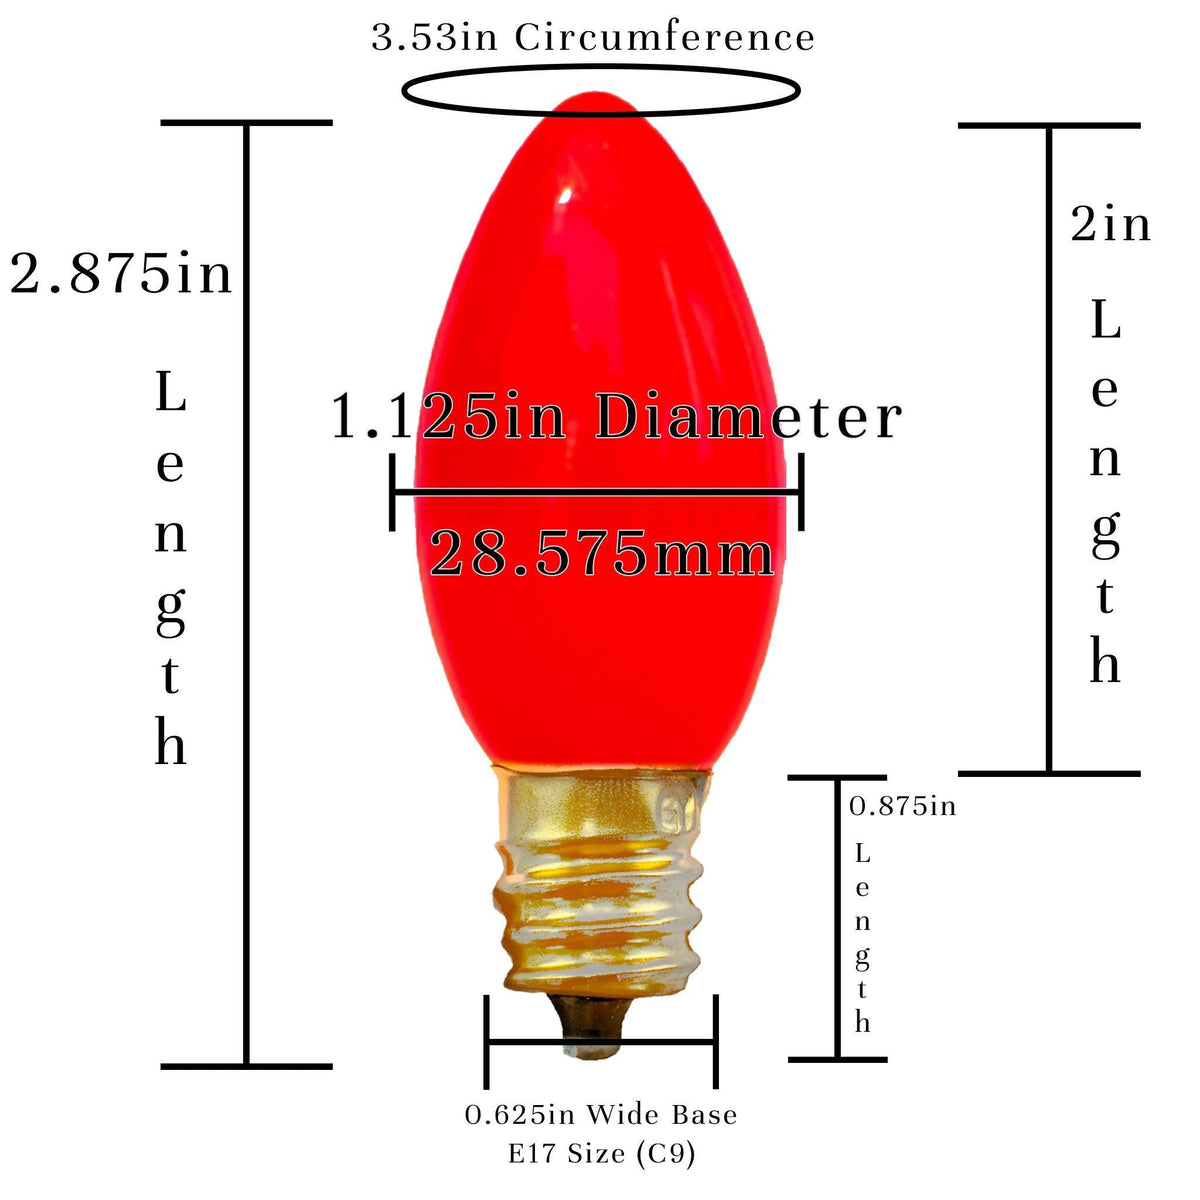 Buy a brand new box of C7/C9 Candelabra Style Valentine's Day Replacement Light Bulbs sold in the box of 25 from leedisplay.com